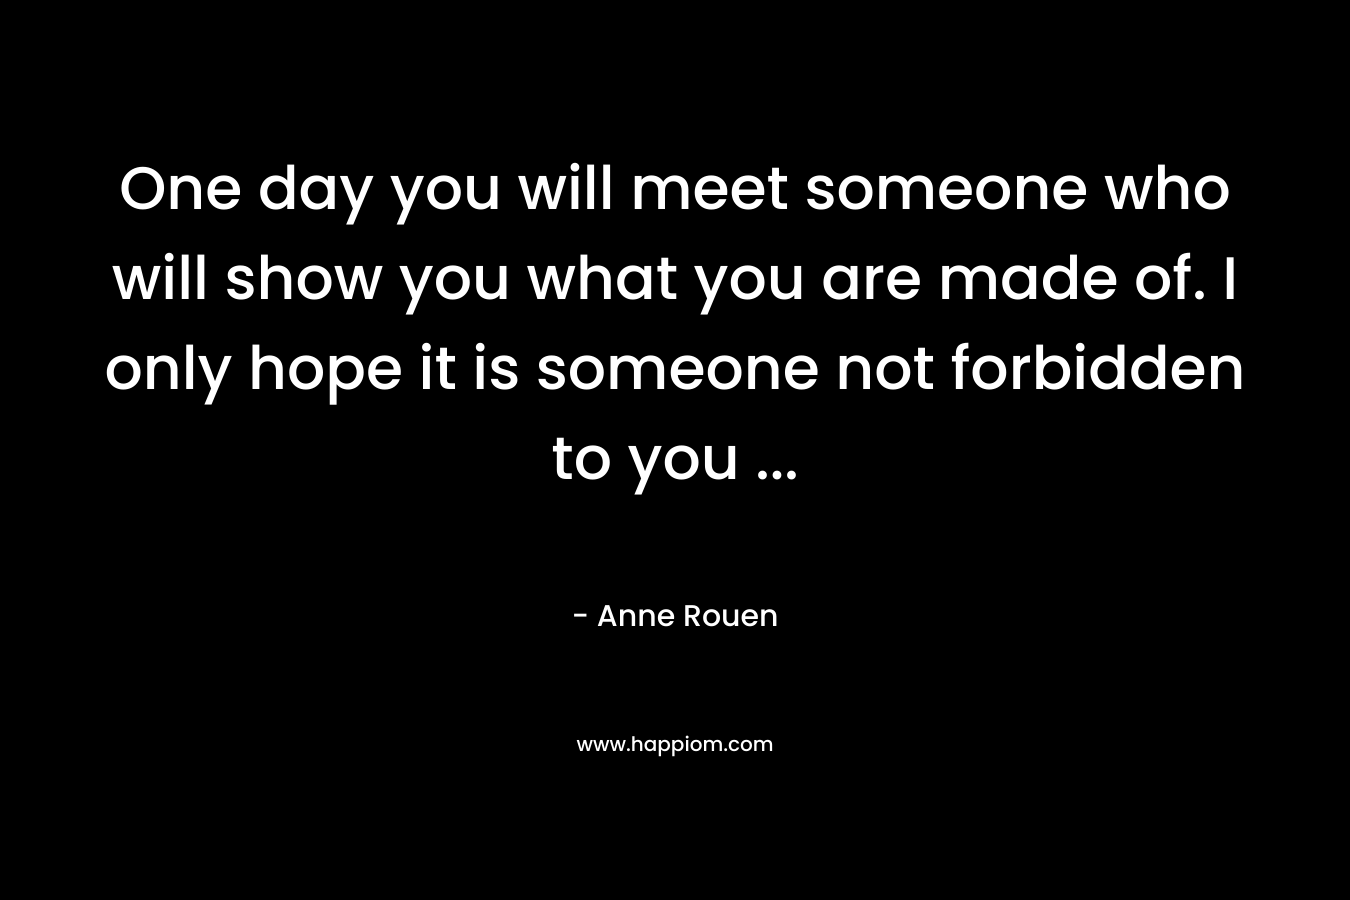 One day you will meet someone who will show you what you are made of. I only hope it is someone not forbidden to you … – Anne Rouen